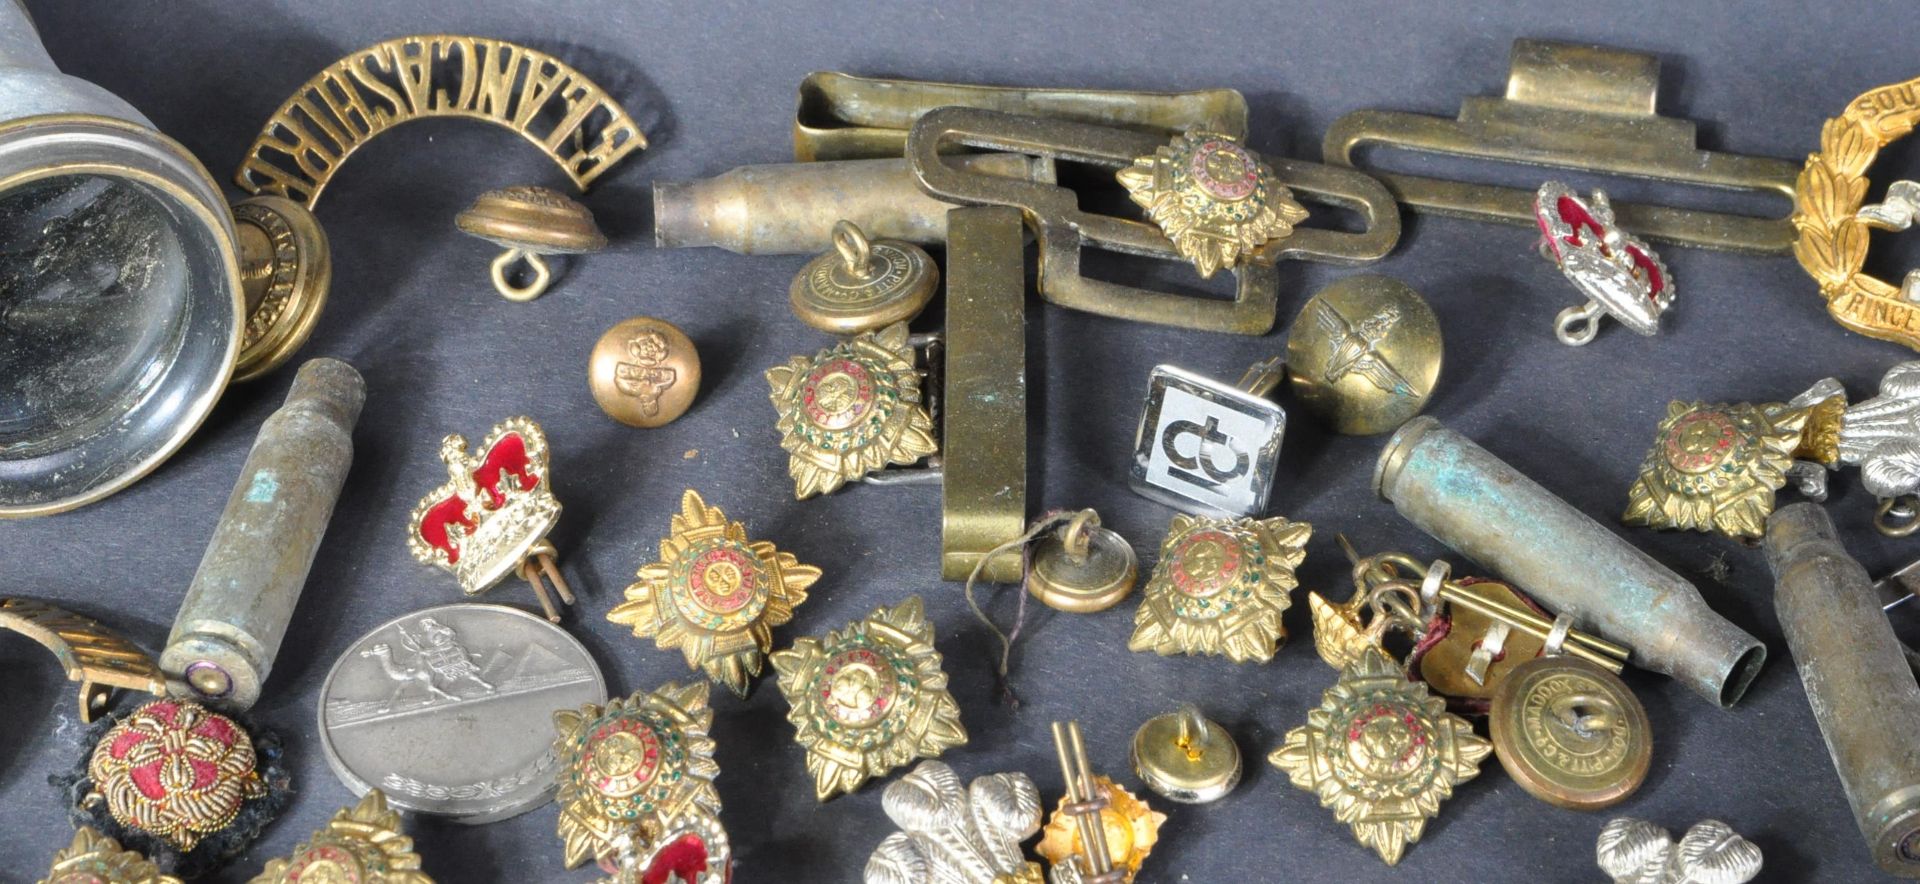 COLLECTION OF ASSORTED MILITARY RELATED ITEMS - BUTTONS, BADGES ETC - Image 3 of 6